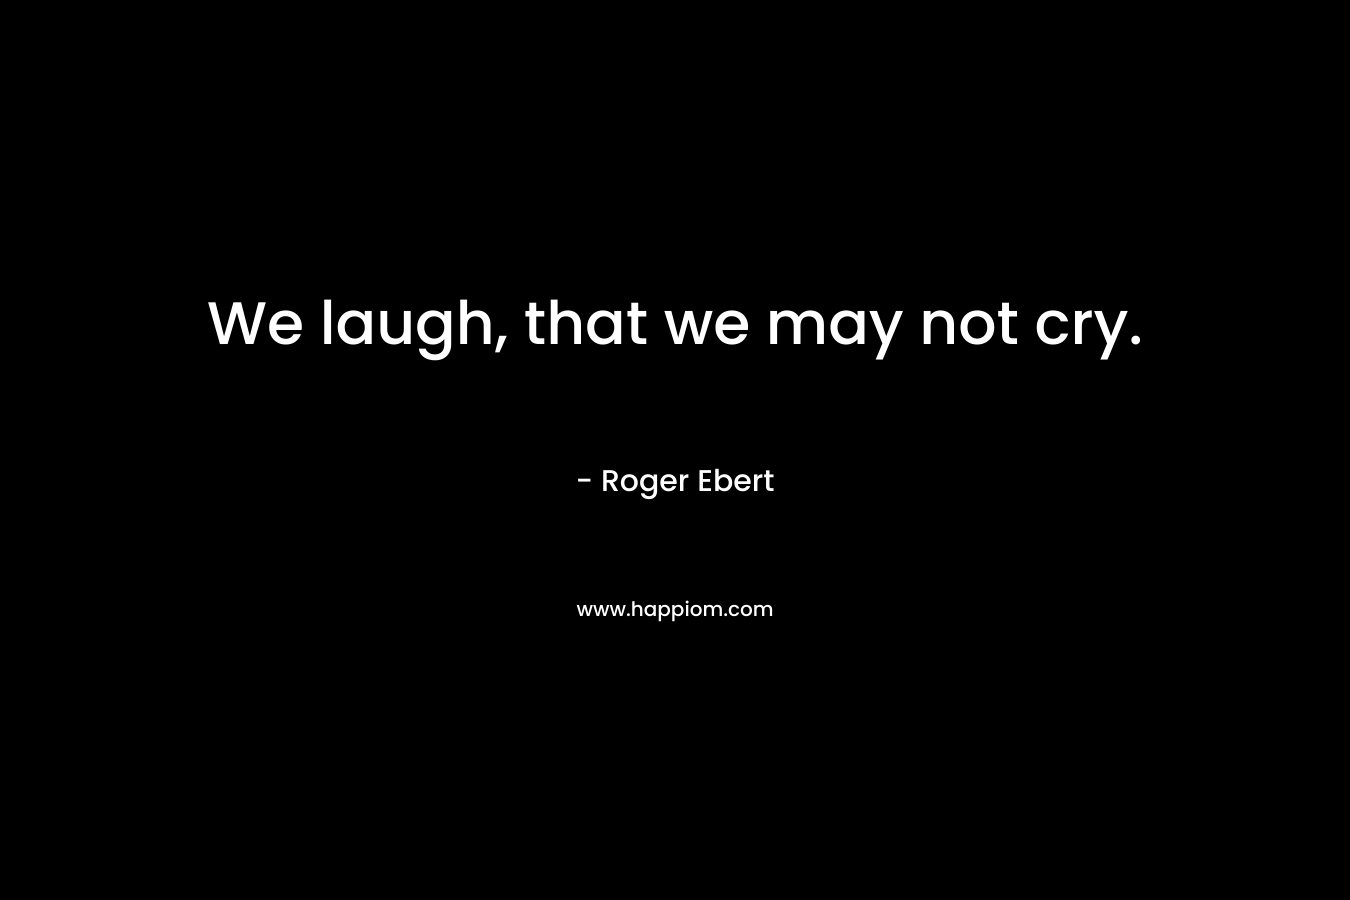 We laugh, that we may not cry.